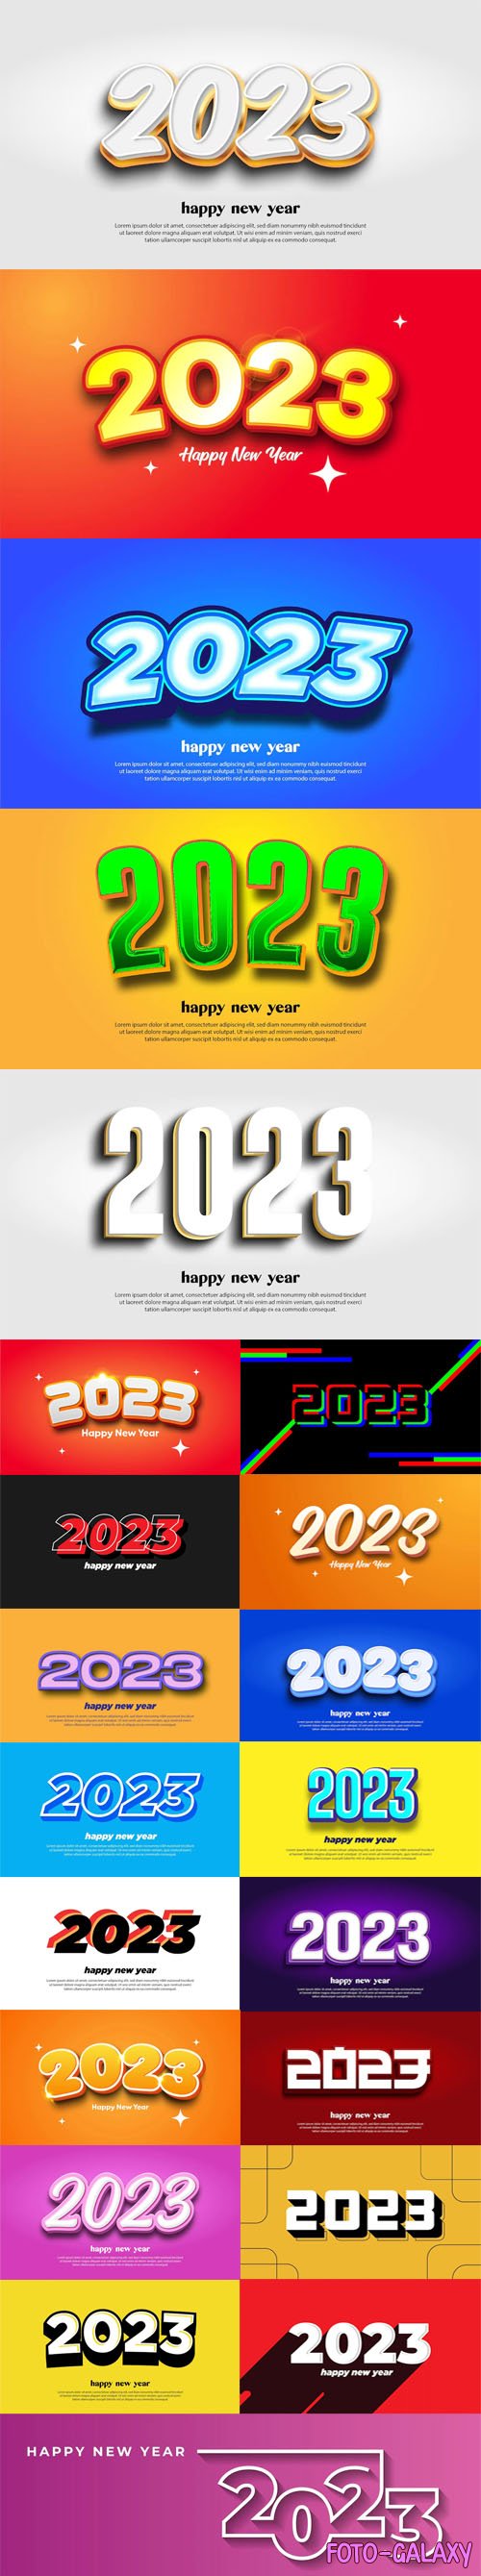 Happy New Year 2023 - 20+ Creative Vector Backgrounds Templates